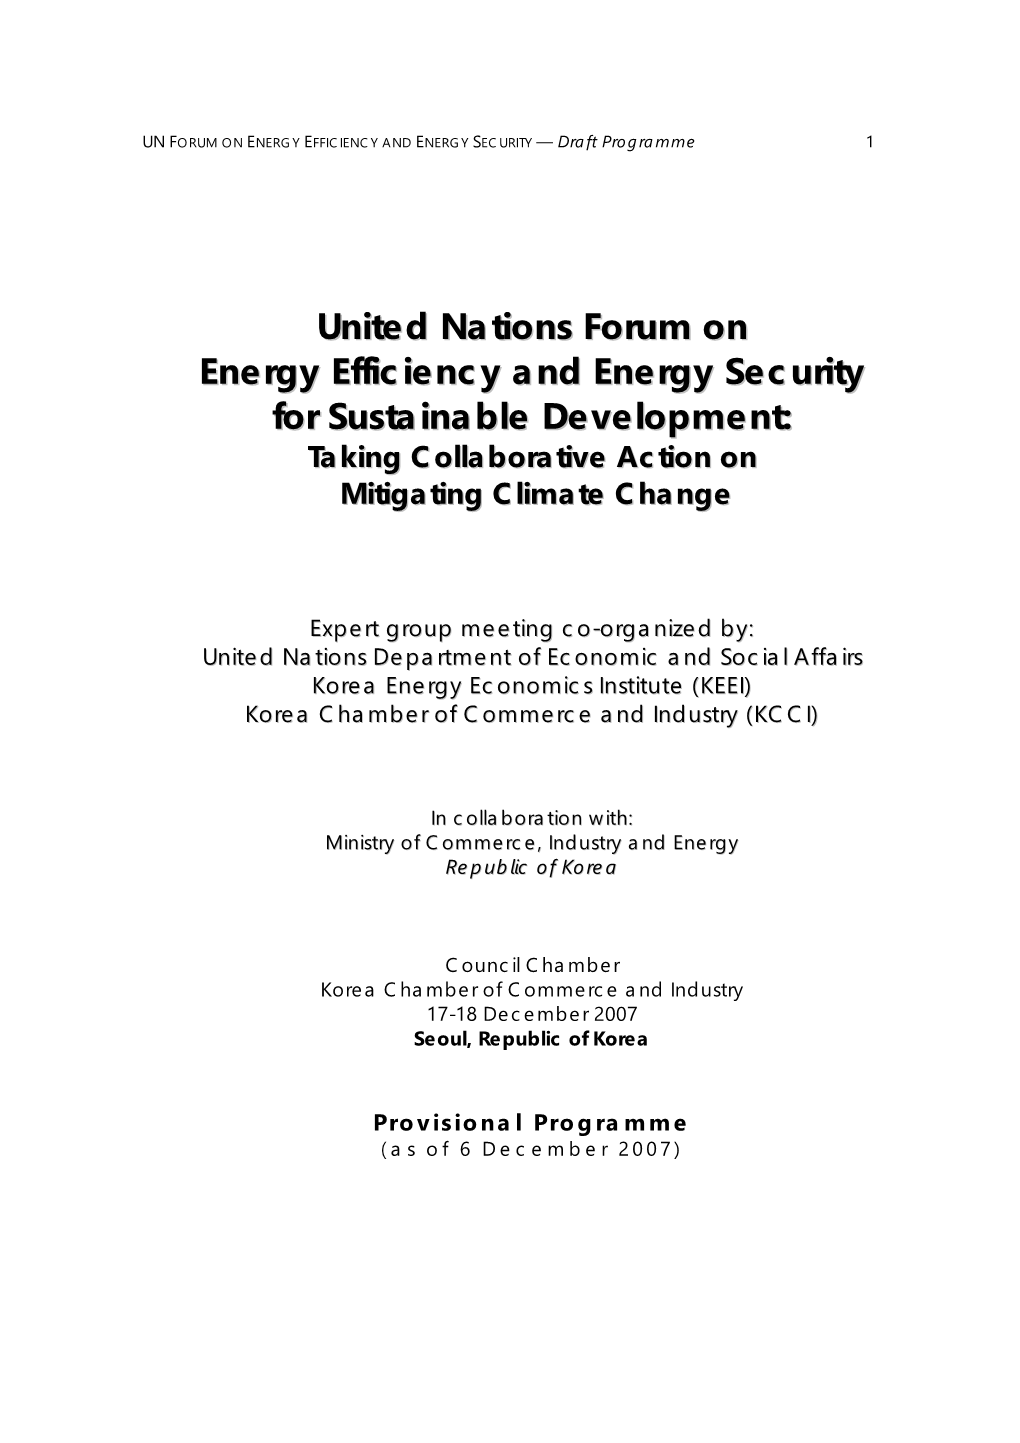 United Nations Forum on Energy Efficiency and Energy Security for Sustainable Development: Taking Collaborative Action on Mitigating Climate Change